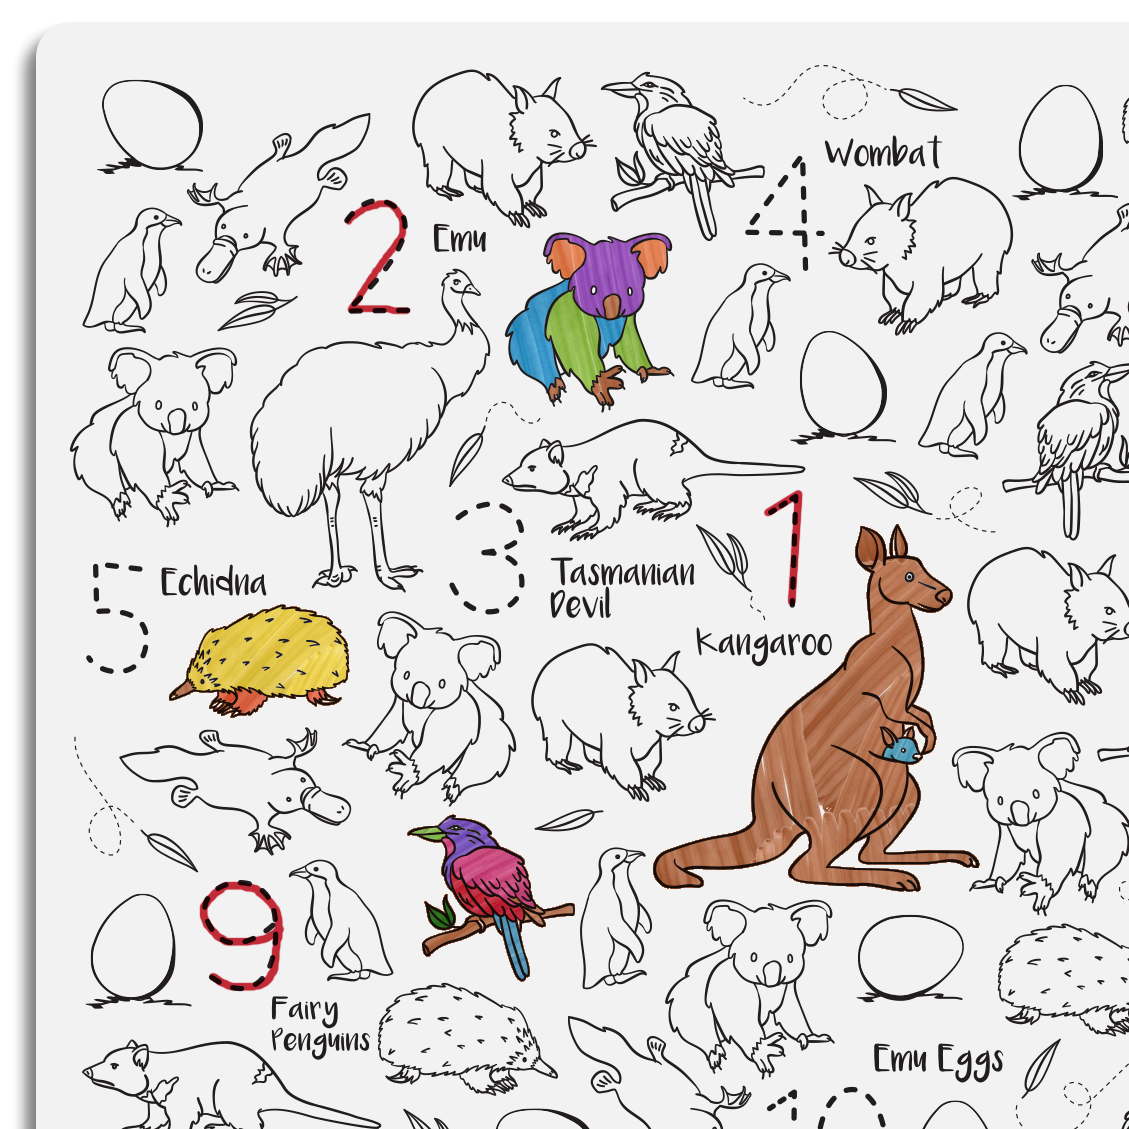 HeyDoodle Reusable Colouring Placemat - Aussie Animals